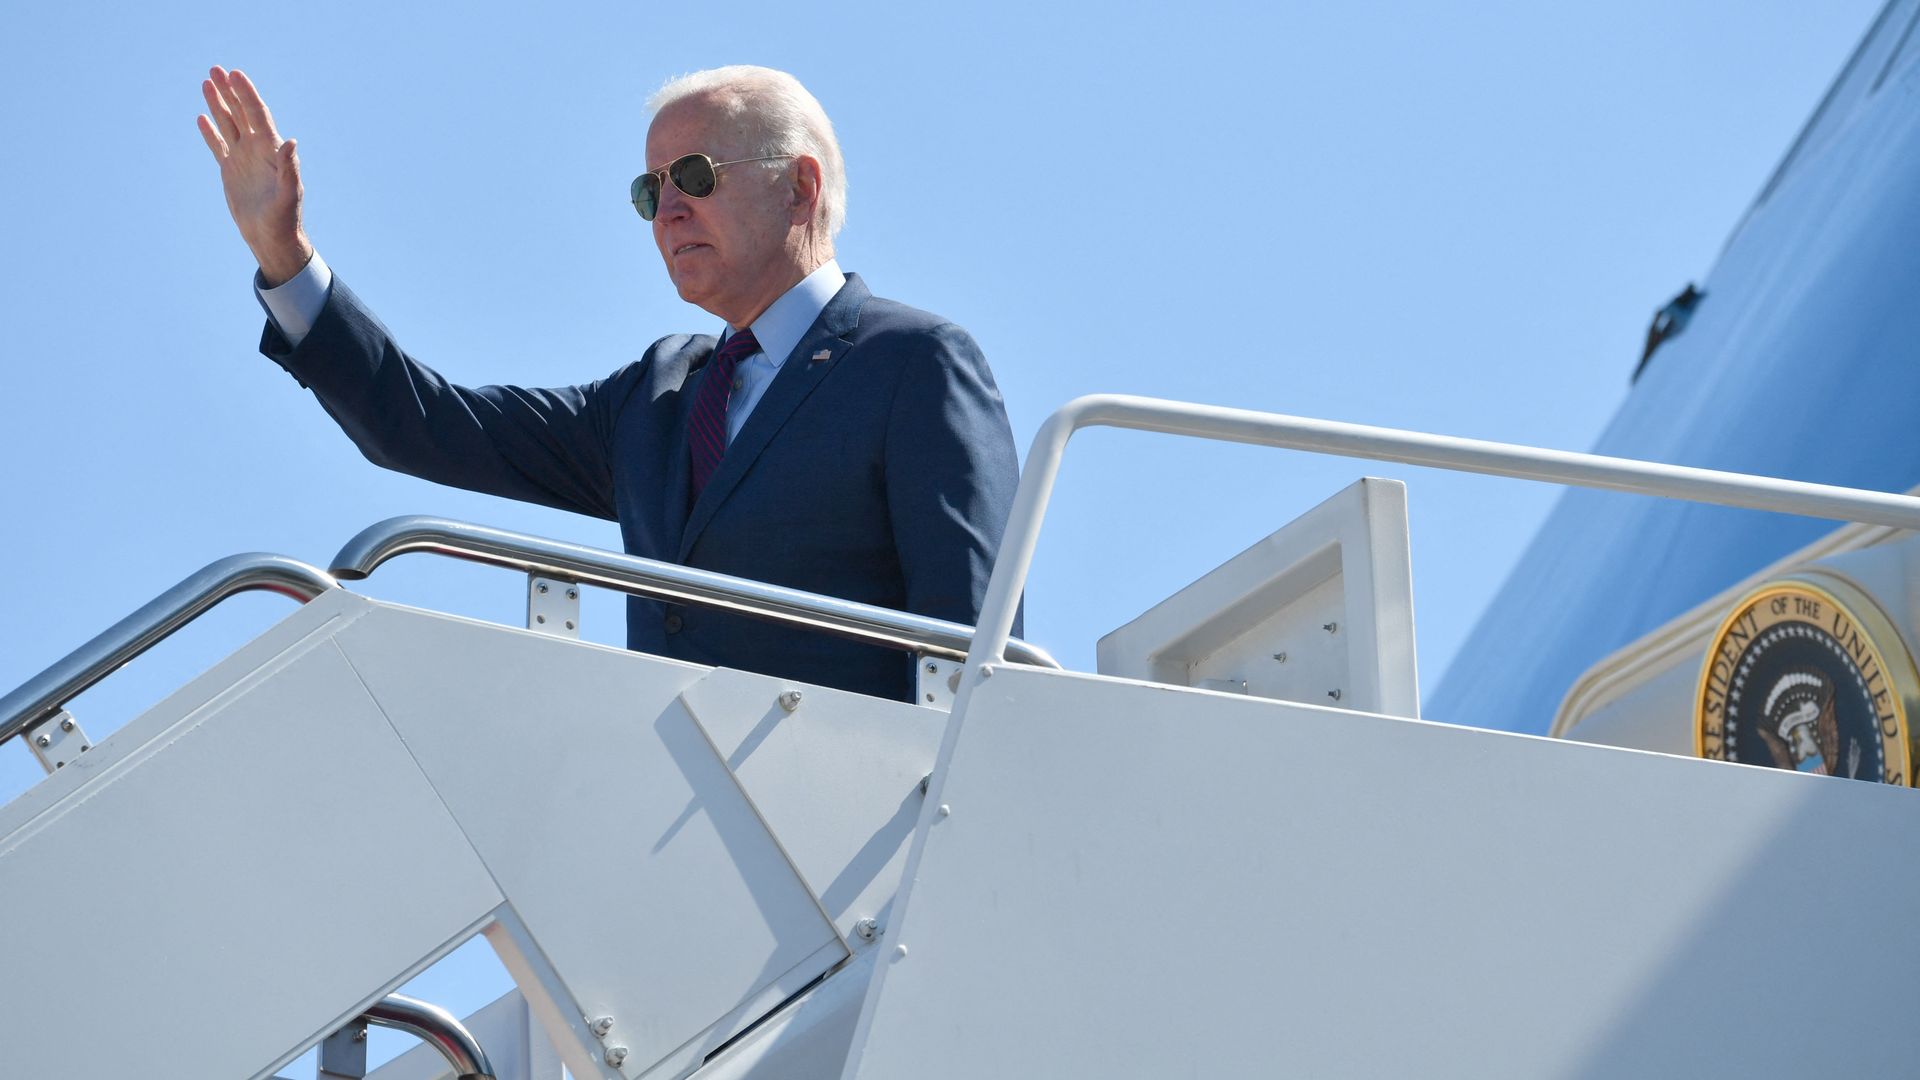 Biden waves while wearing a suit and sunglasses